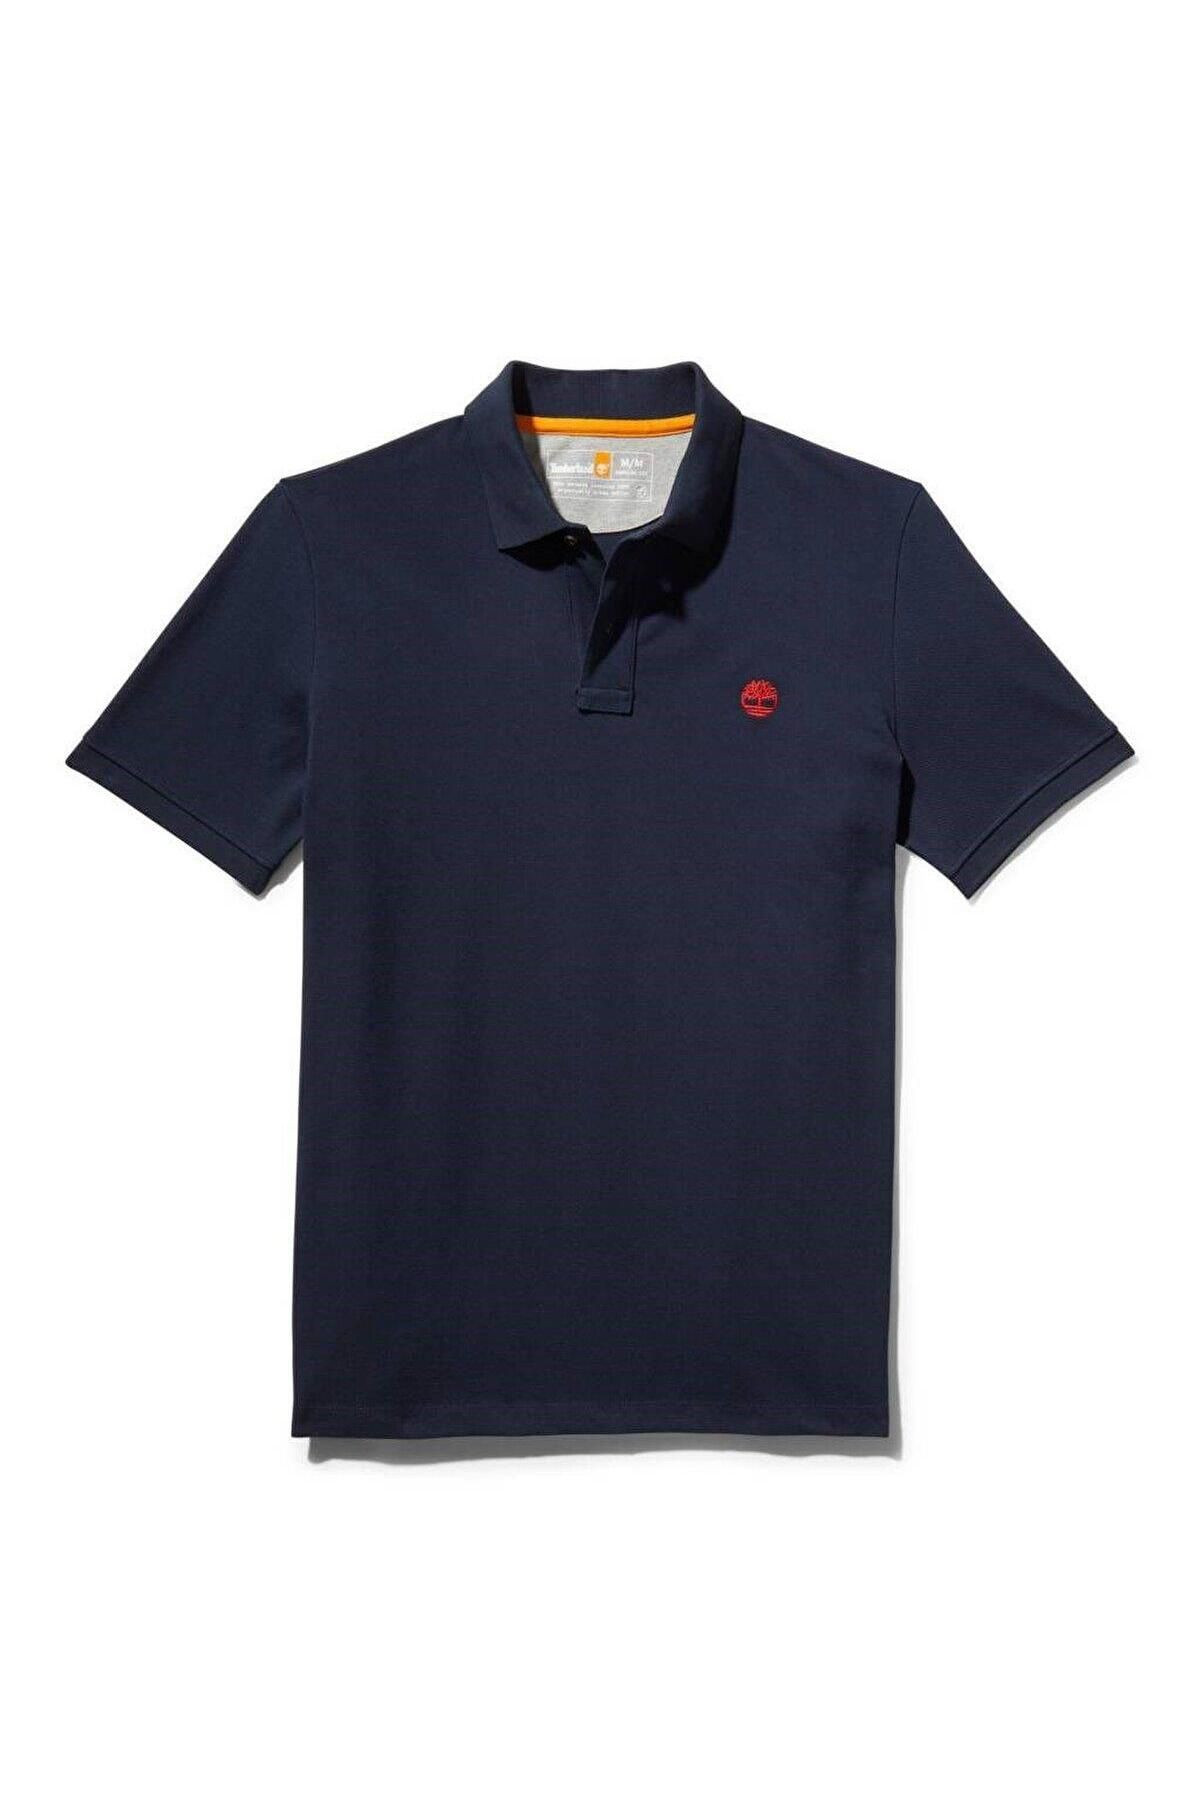 Timberland Pique Short Sleeve Polo TB0A26N44331